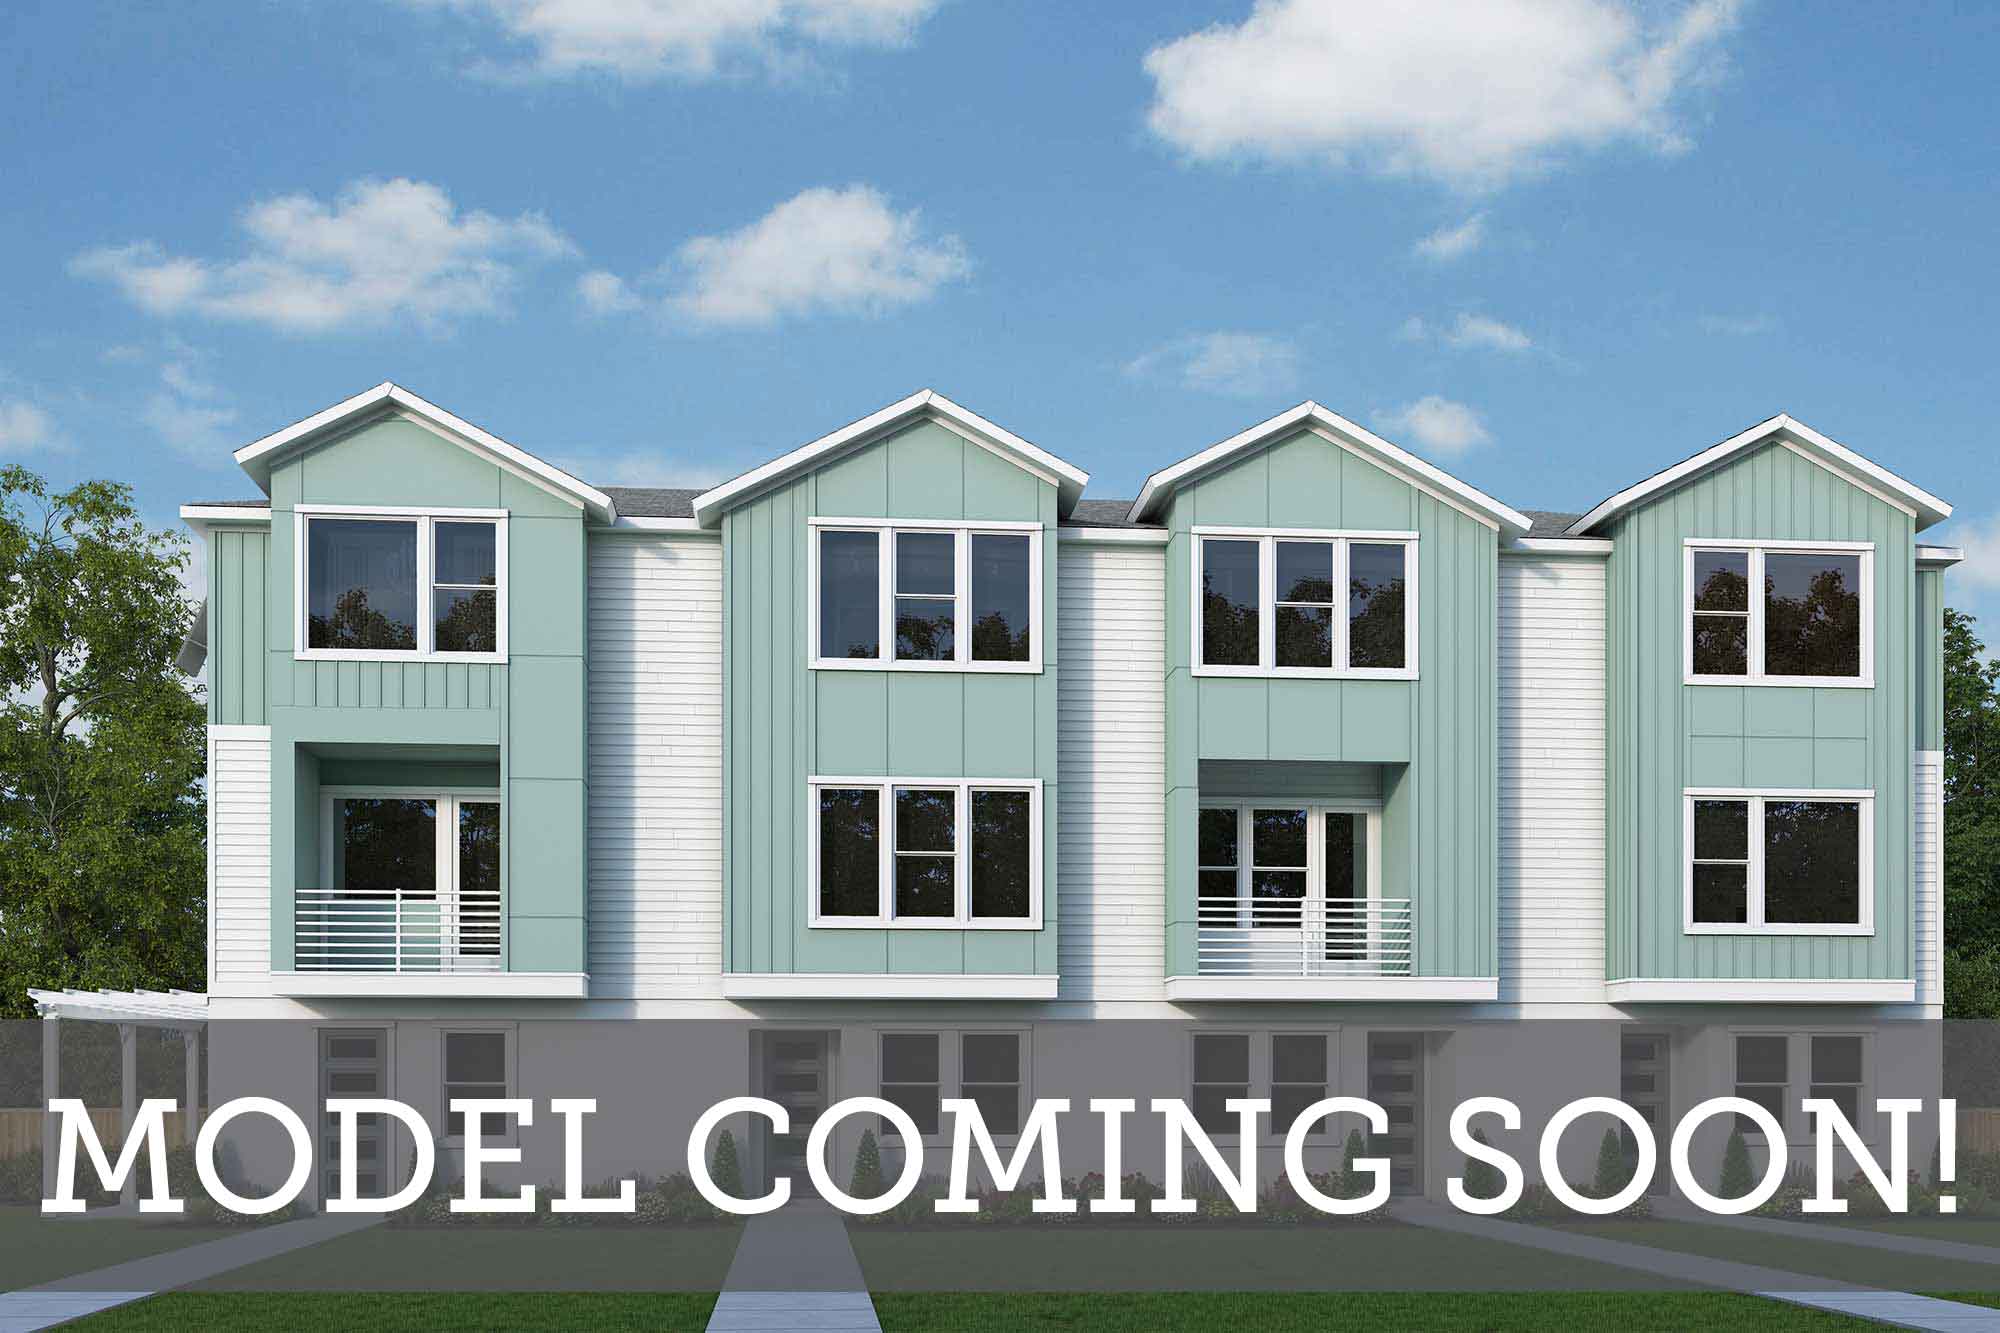 Grand Central Townhomes - Coming Soon